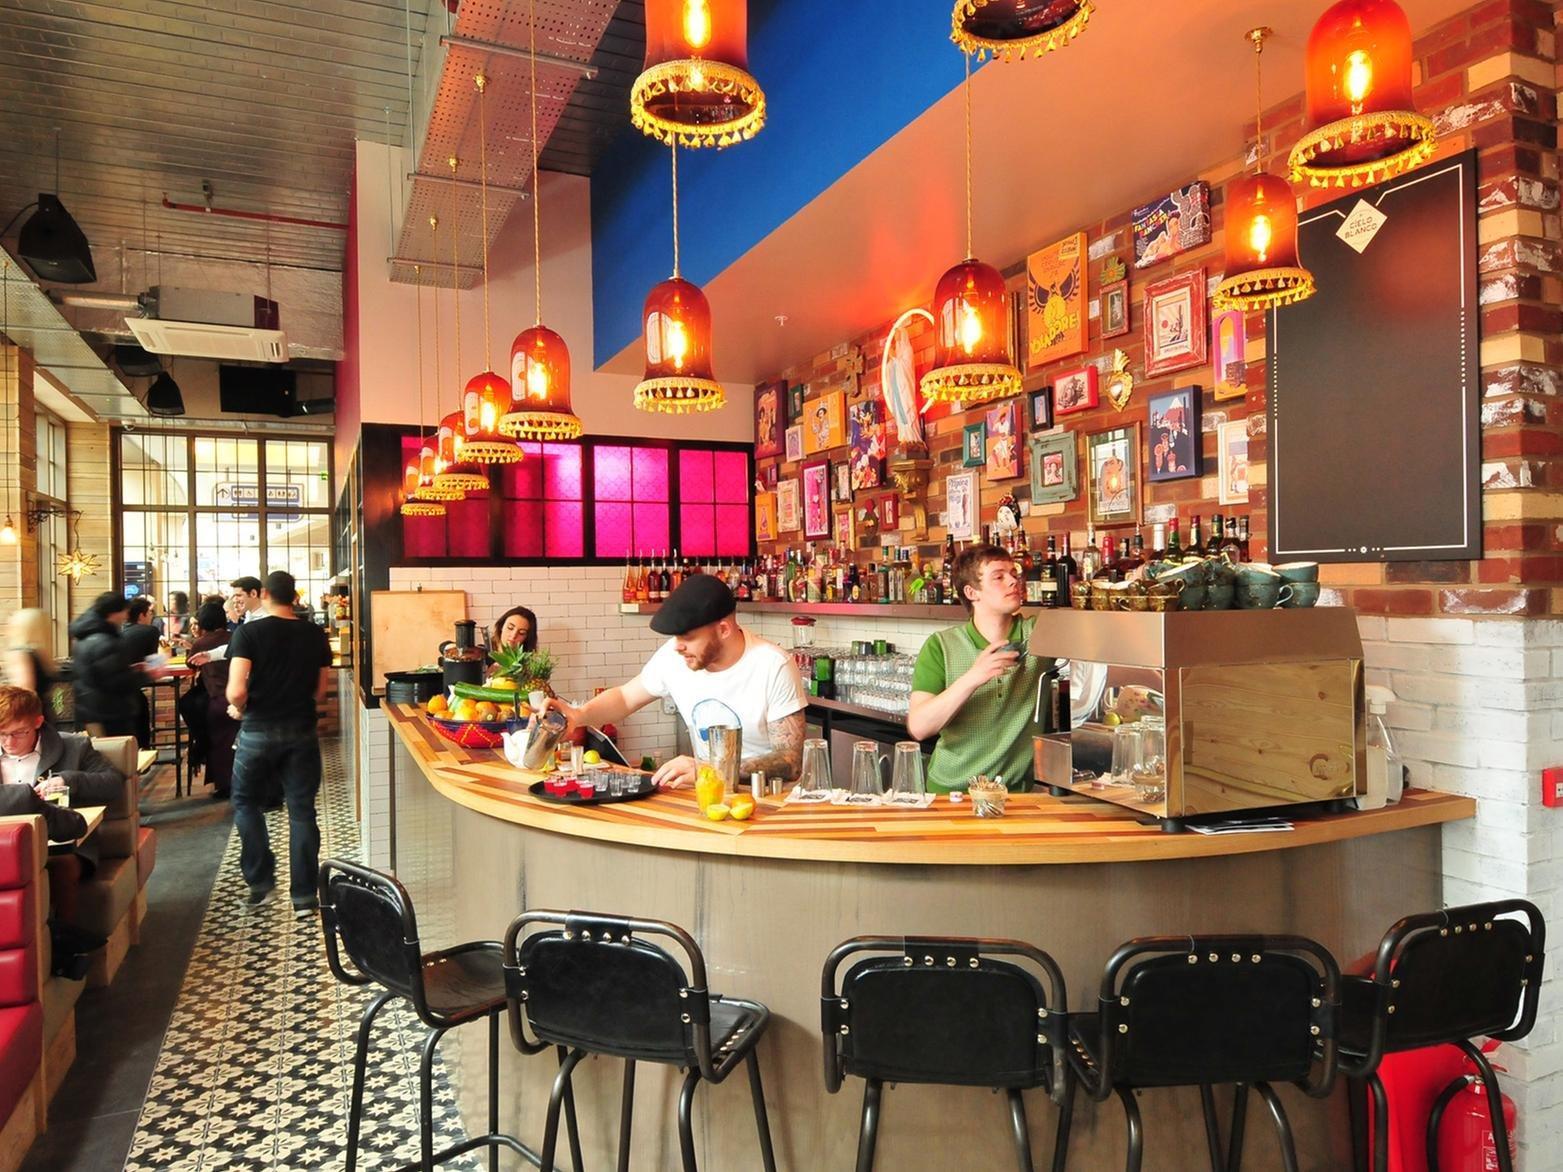 Vibrant Mexican diner with a skylit terrace, serving classic street food, sharing boards and salads.

415, Trinity Leeds, Albion Street, Leeds LS1 5AY